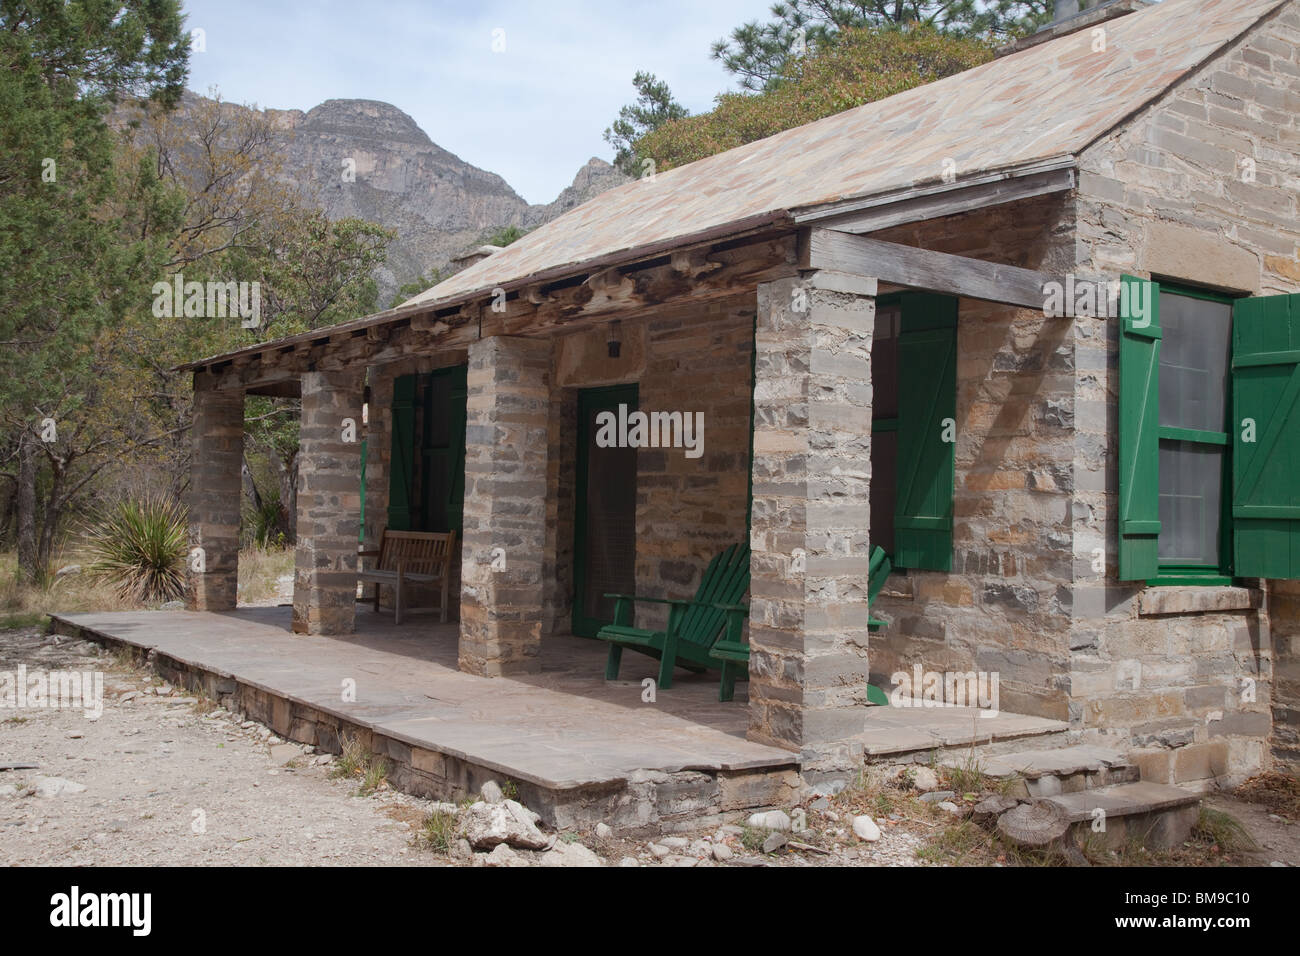 Pratt, Cabine McKittrick Canyon, Guadalupe Mountains National Park, Texas Banque D'Images